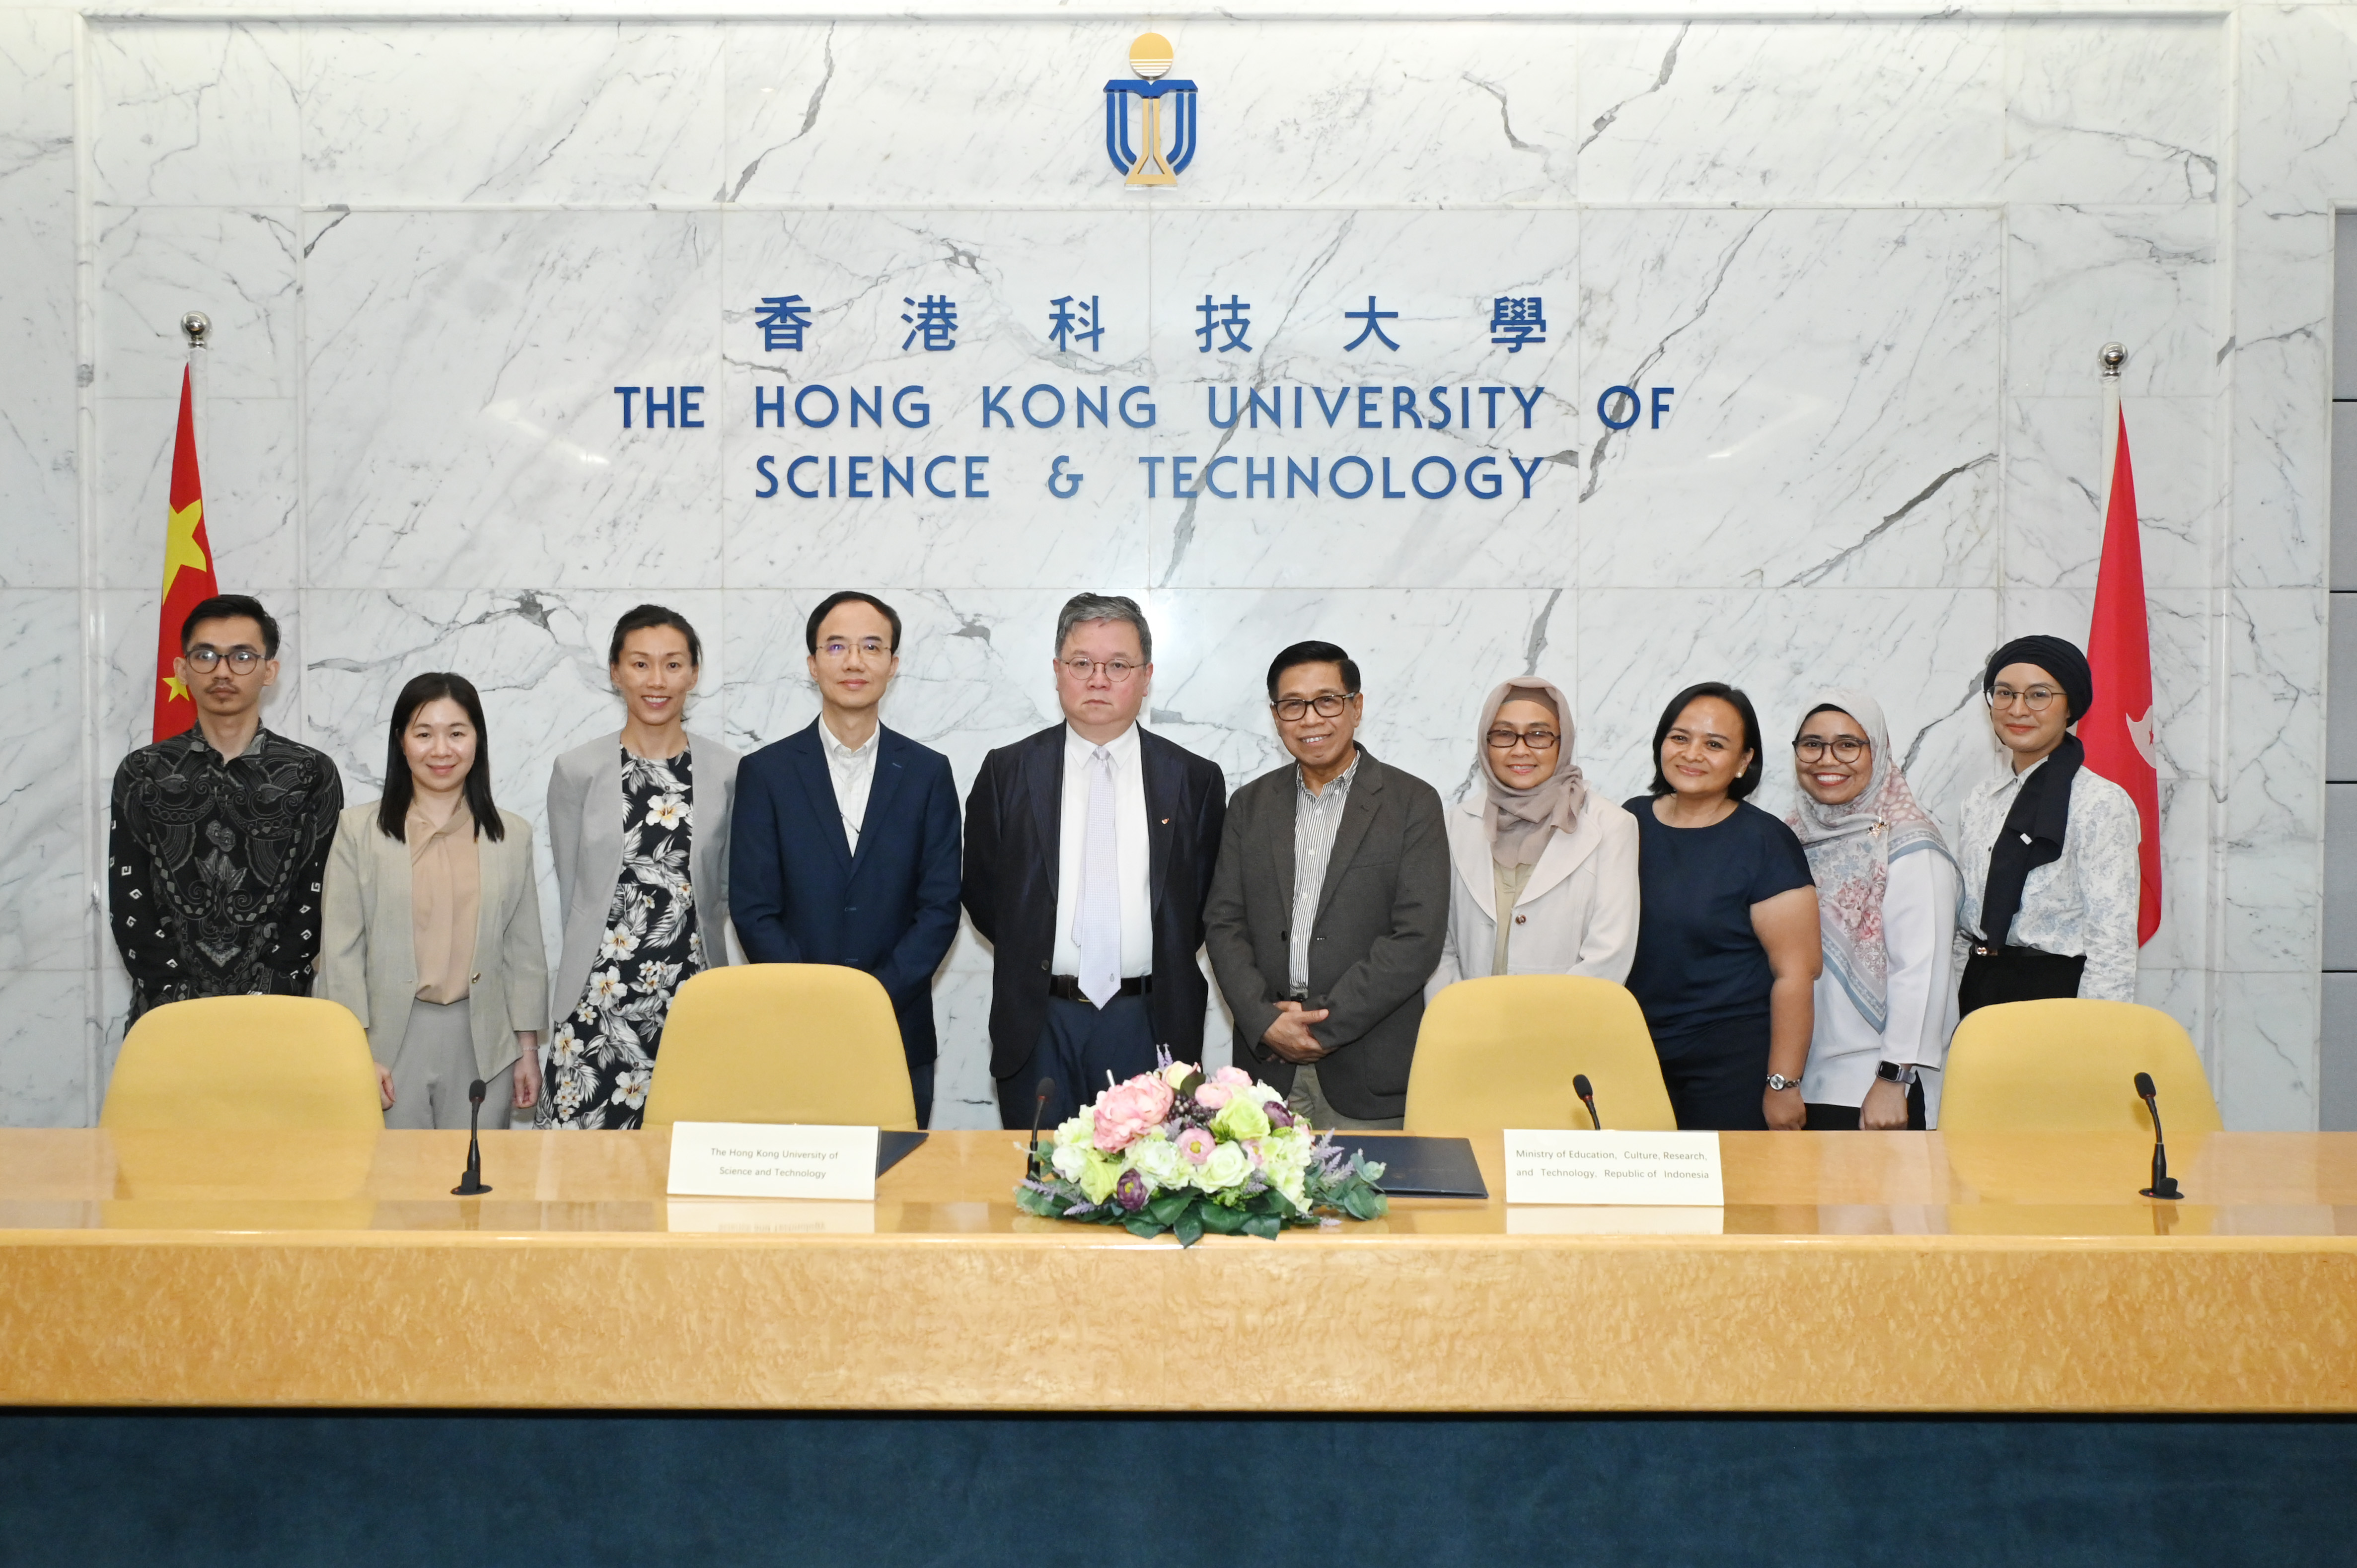 HKUST representatives including Prof. Guo Yike (fifth left), Associate Provost (Teaching & Learning) Prof. Jimmy FUNG (fourth left) and Director of Undergraduate Recruitment & Admissions Office Prof. Emily NASON (third left) welcome the Indonesian Government delegation.